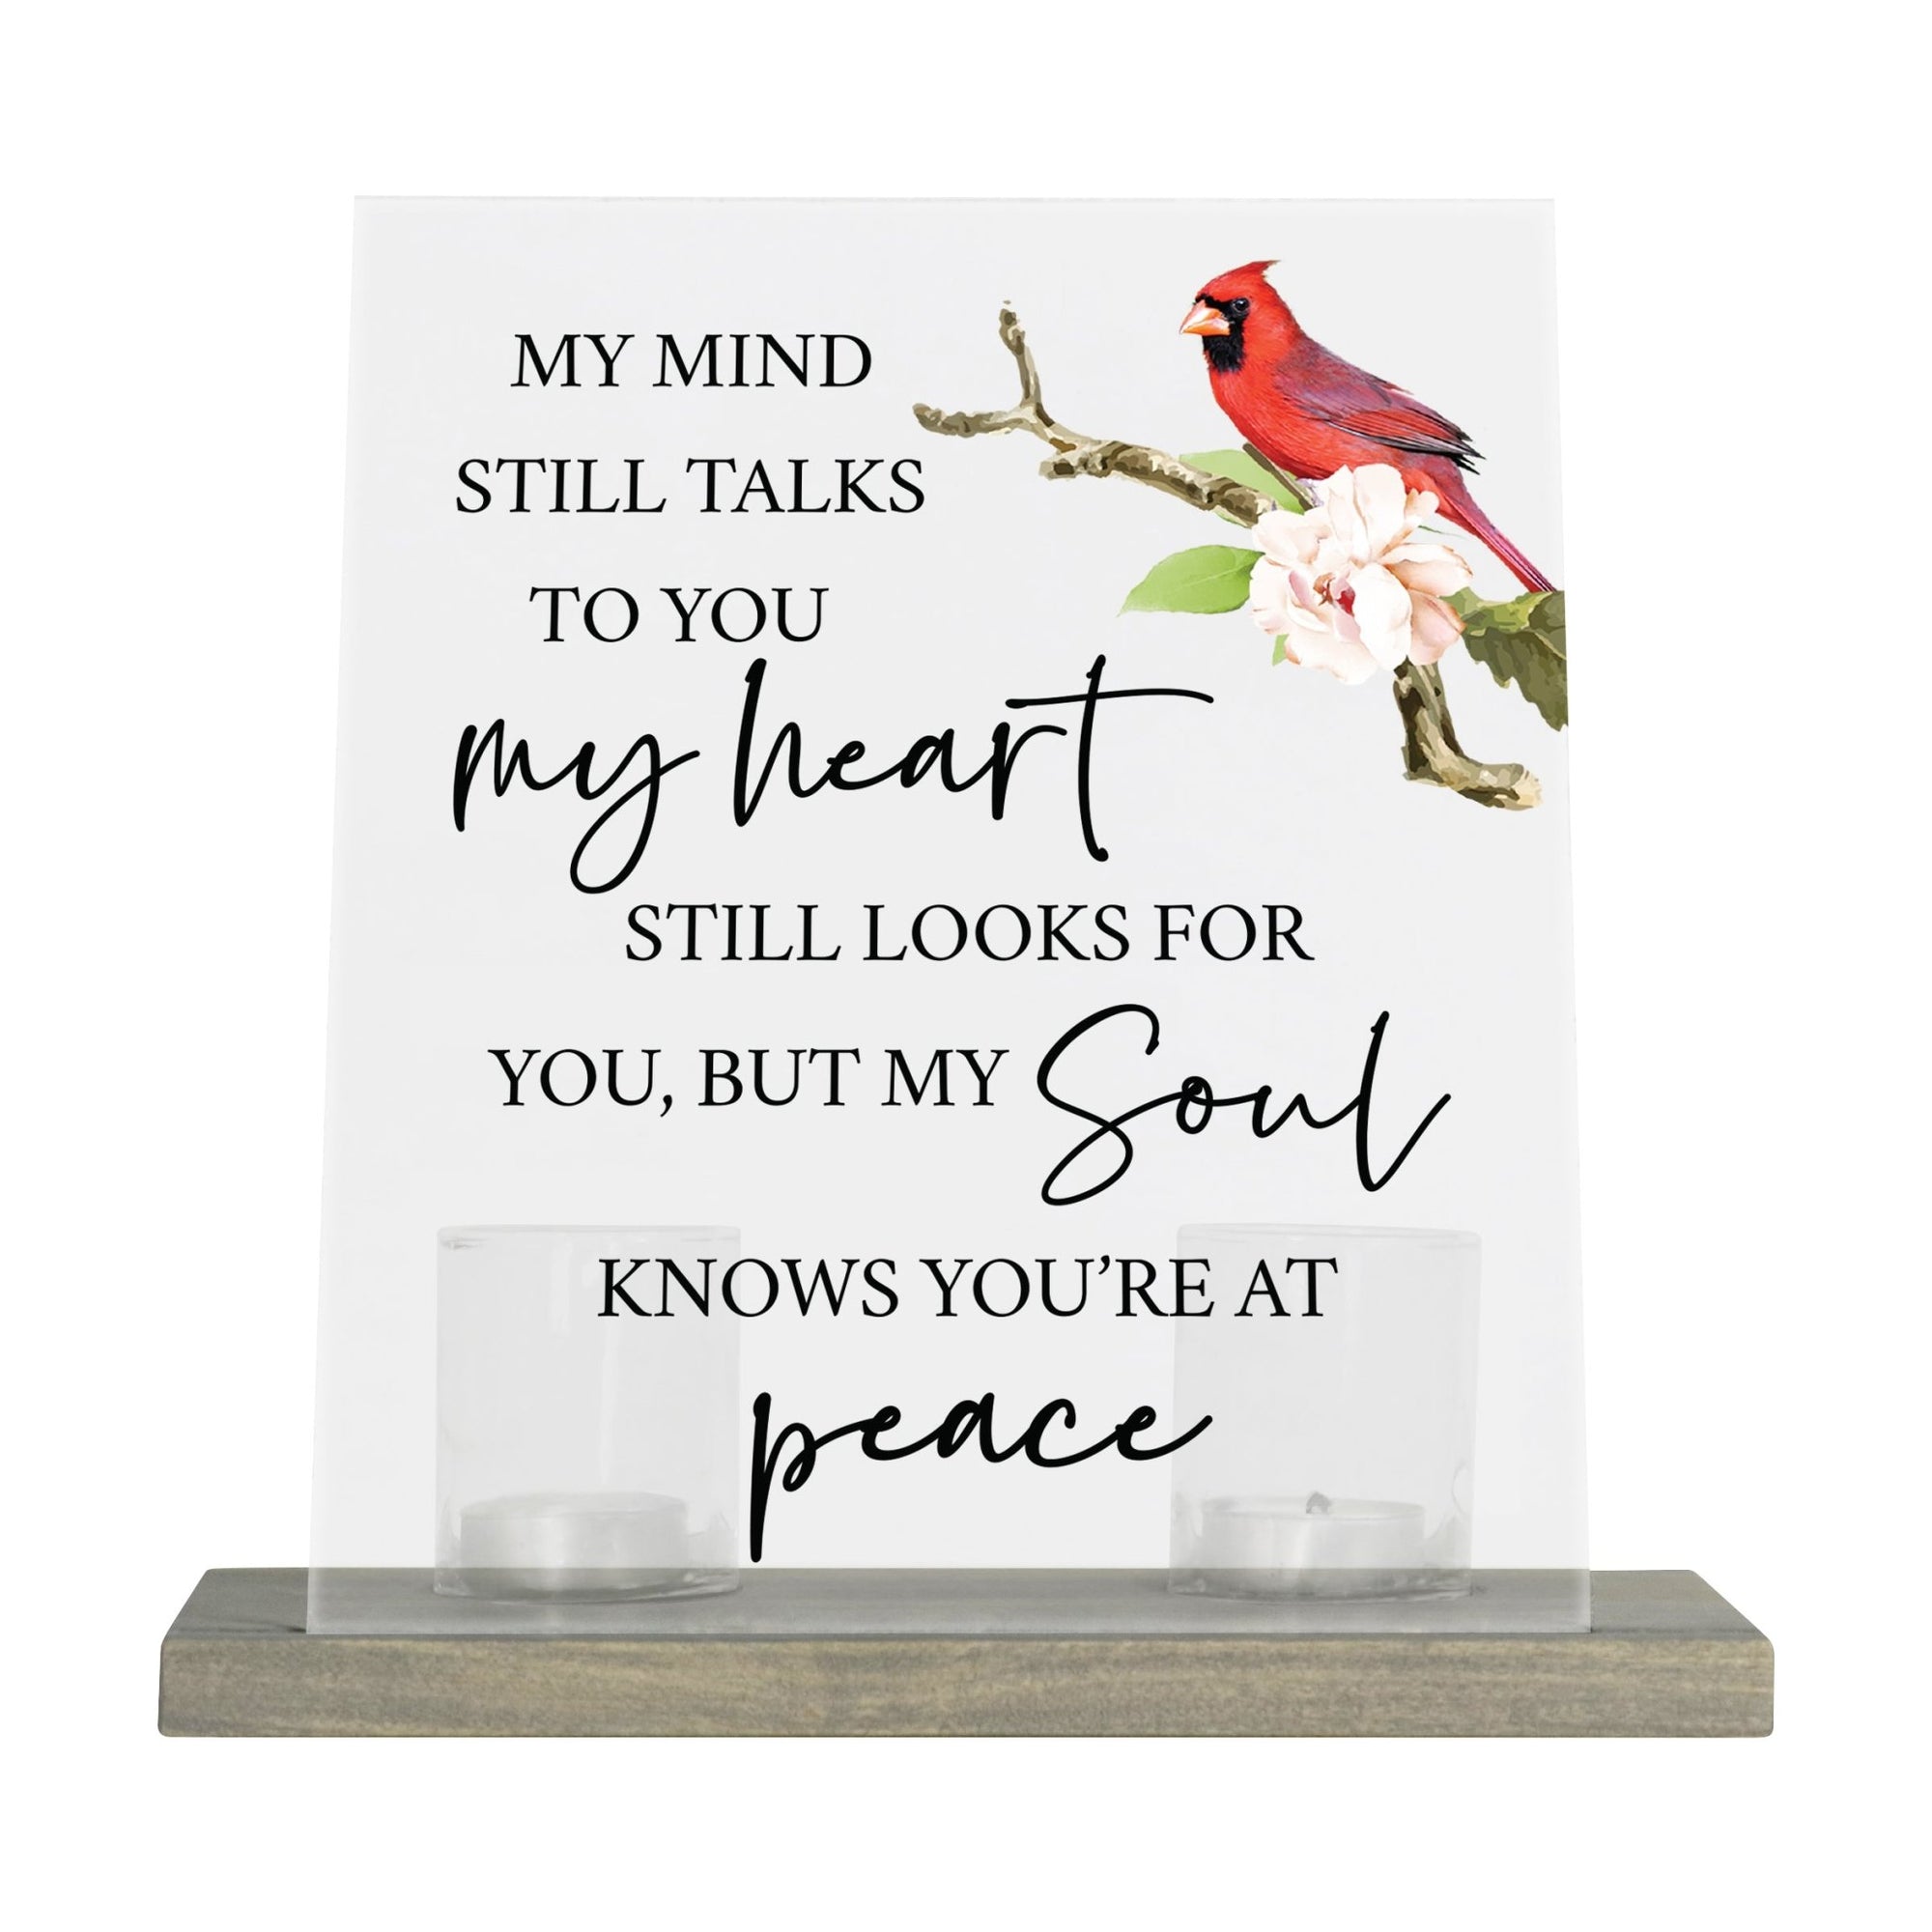 Vintage Memorial Cardinal Acrylic Sign Candle Holder With Wood Base And Glass Votives For Home Décor | My Mind Still Talks - LifeSong Milestones